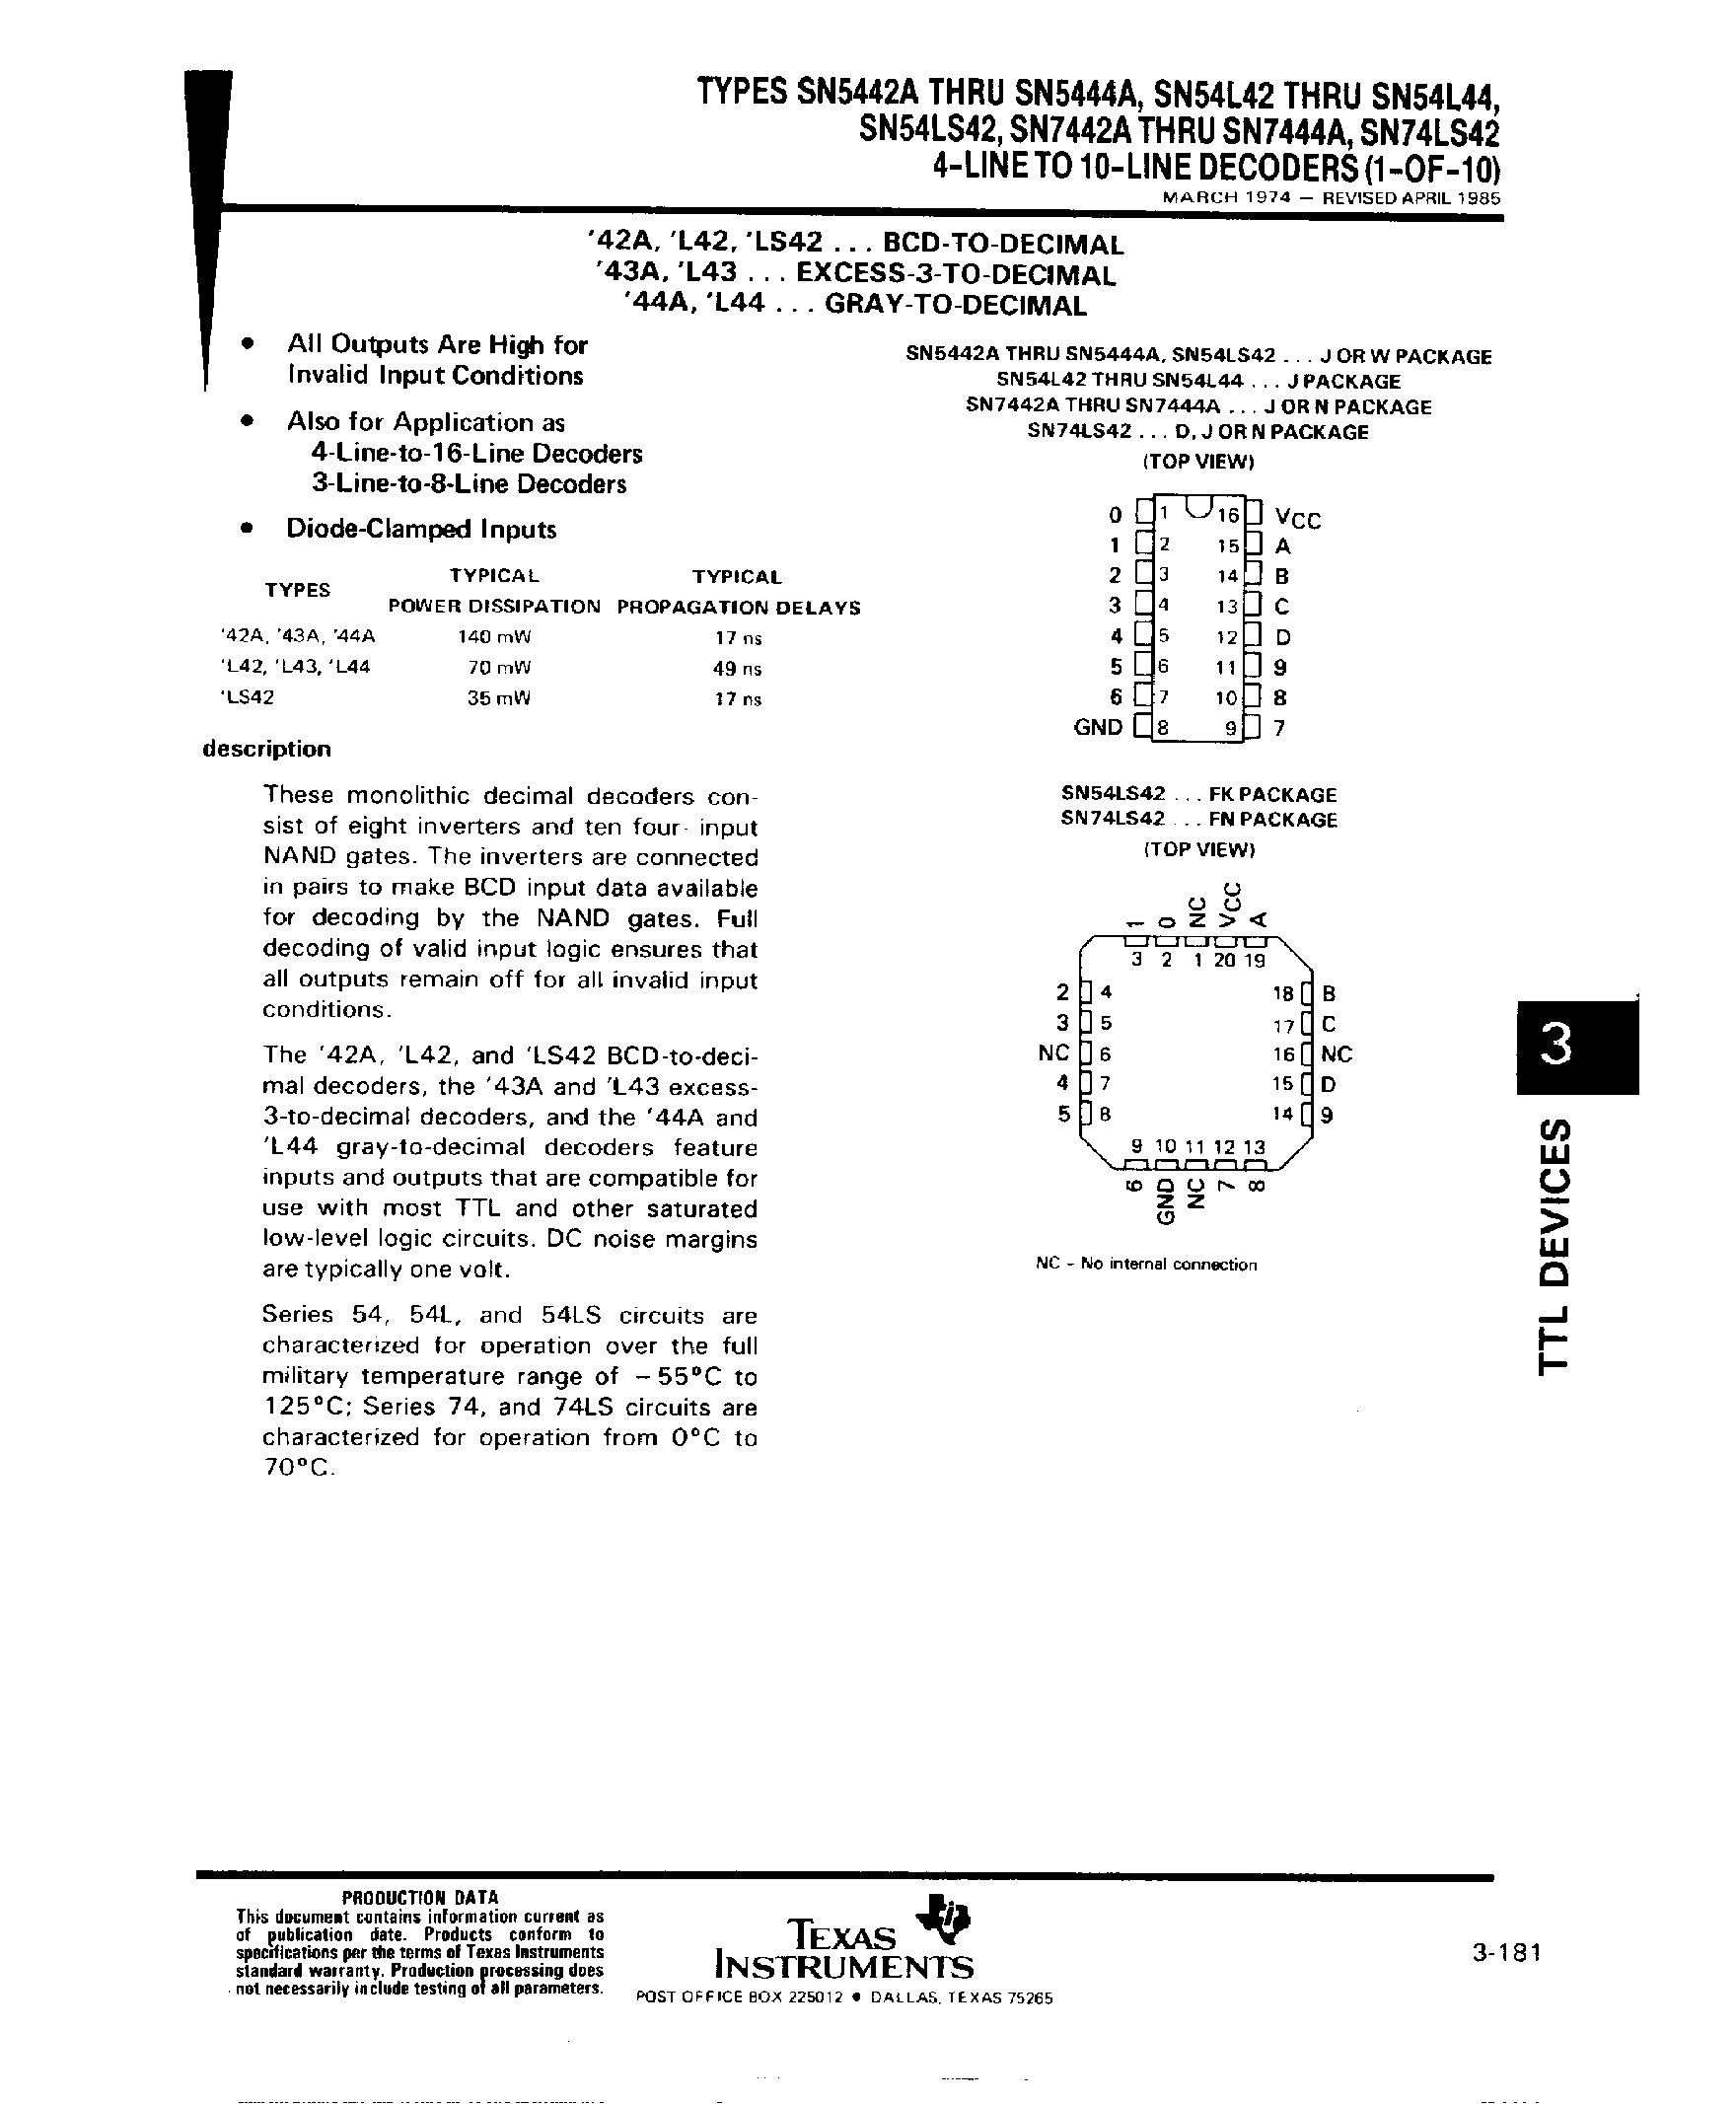 Datasheet SN7443 - 4 Line to 10 Line Decoders page 1